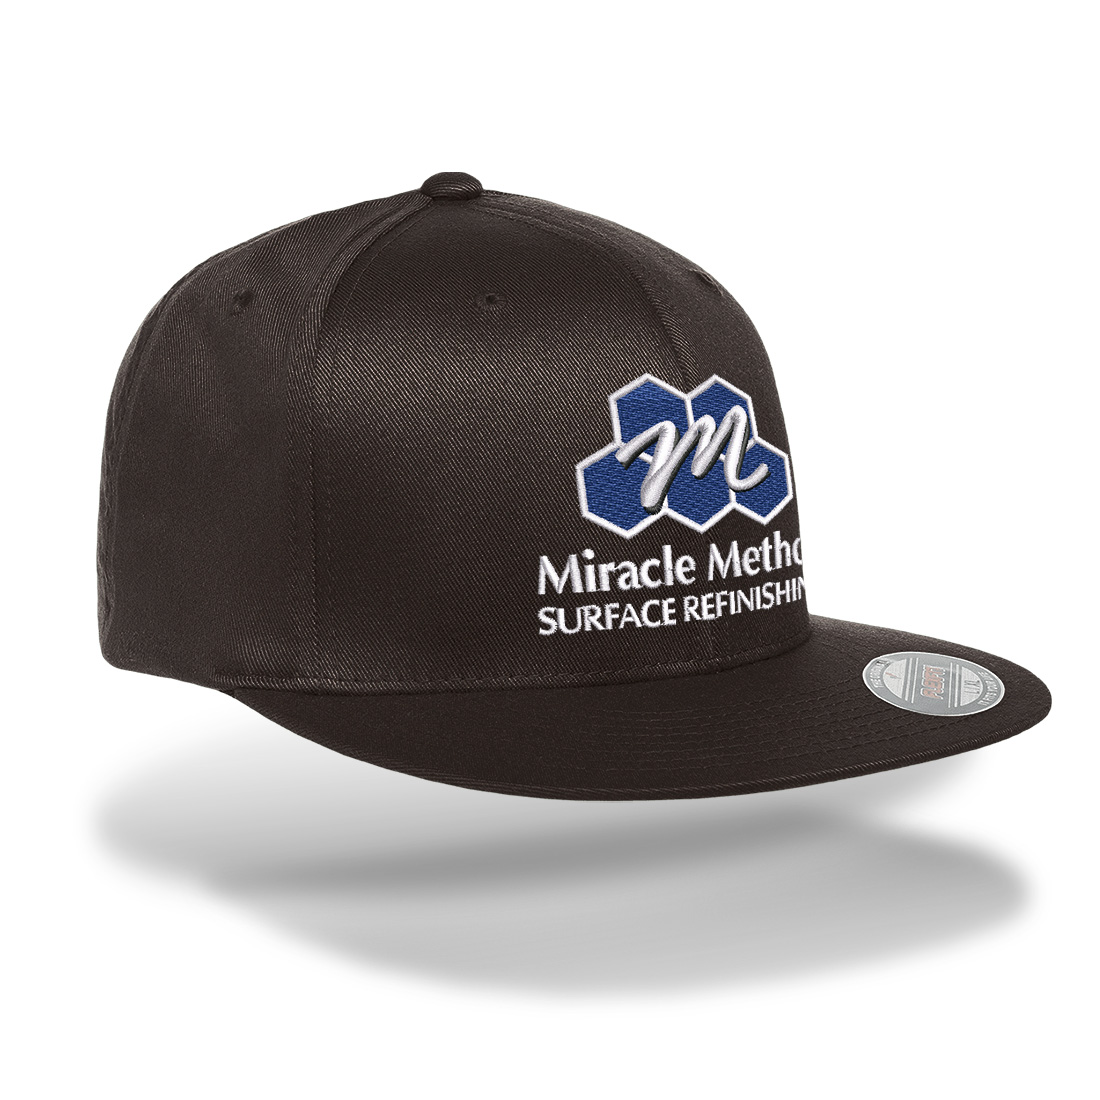 Sideview of Miracle Method embroidered black FlexFit cap